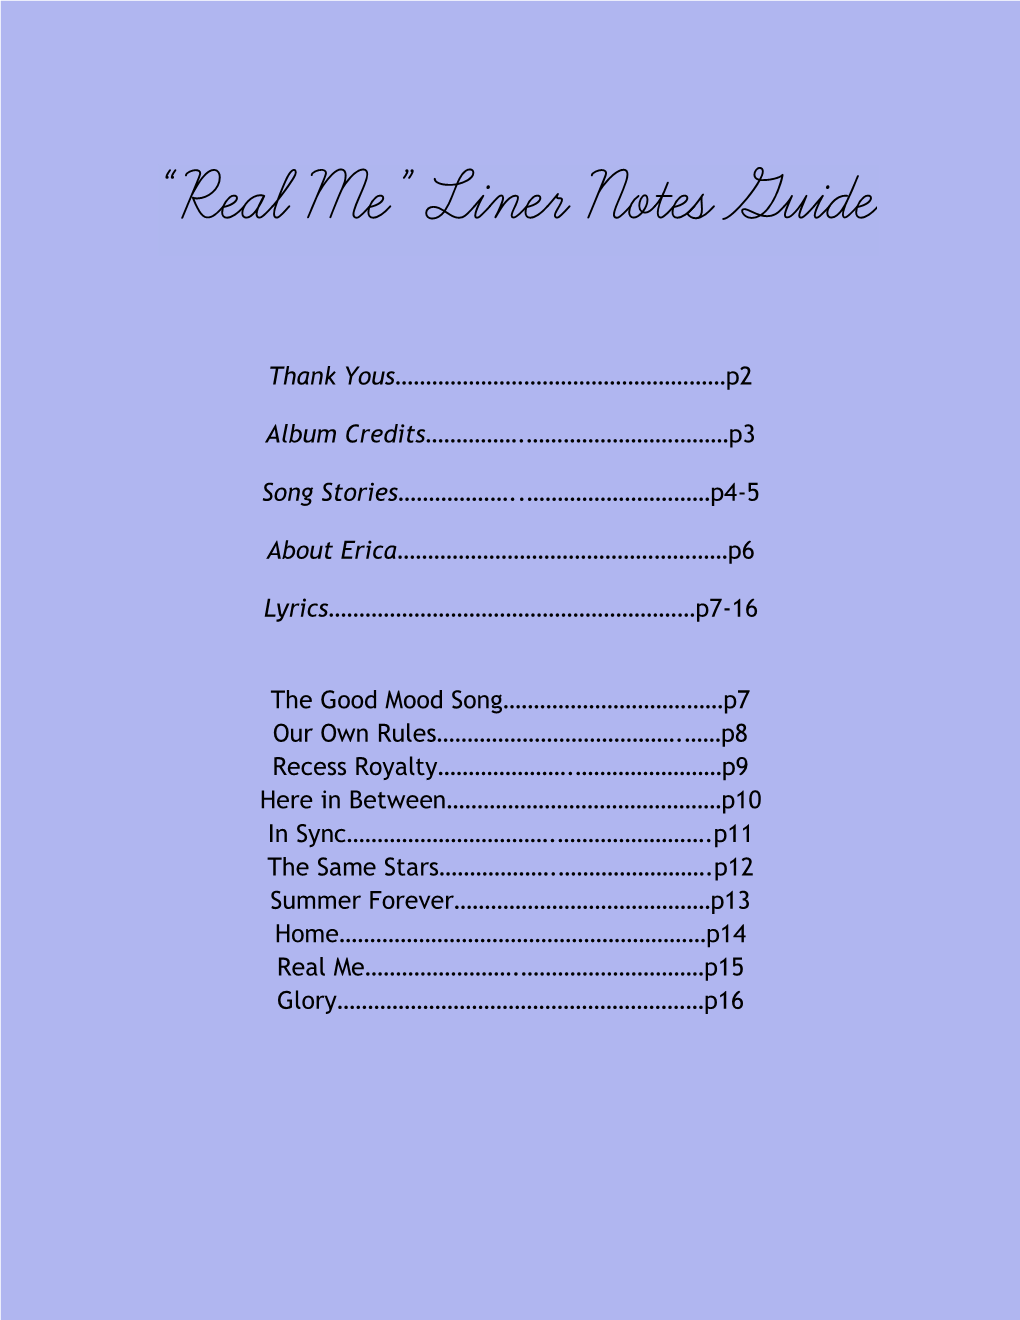 “Real Me” Liner Notes Guide